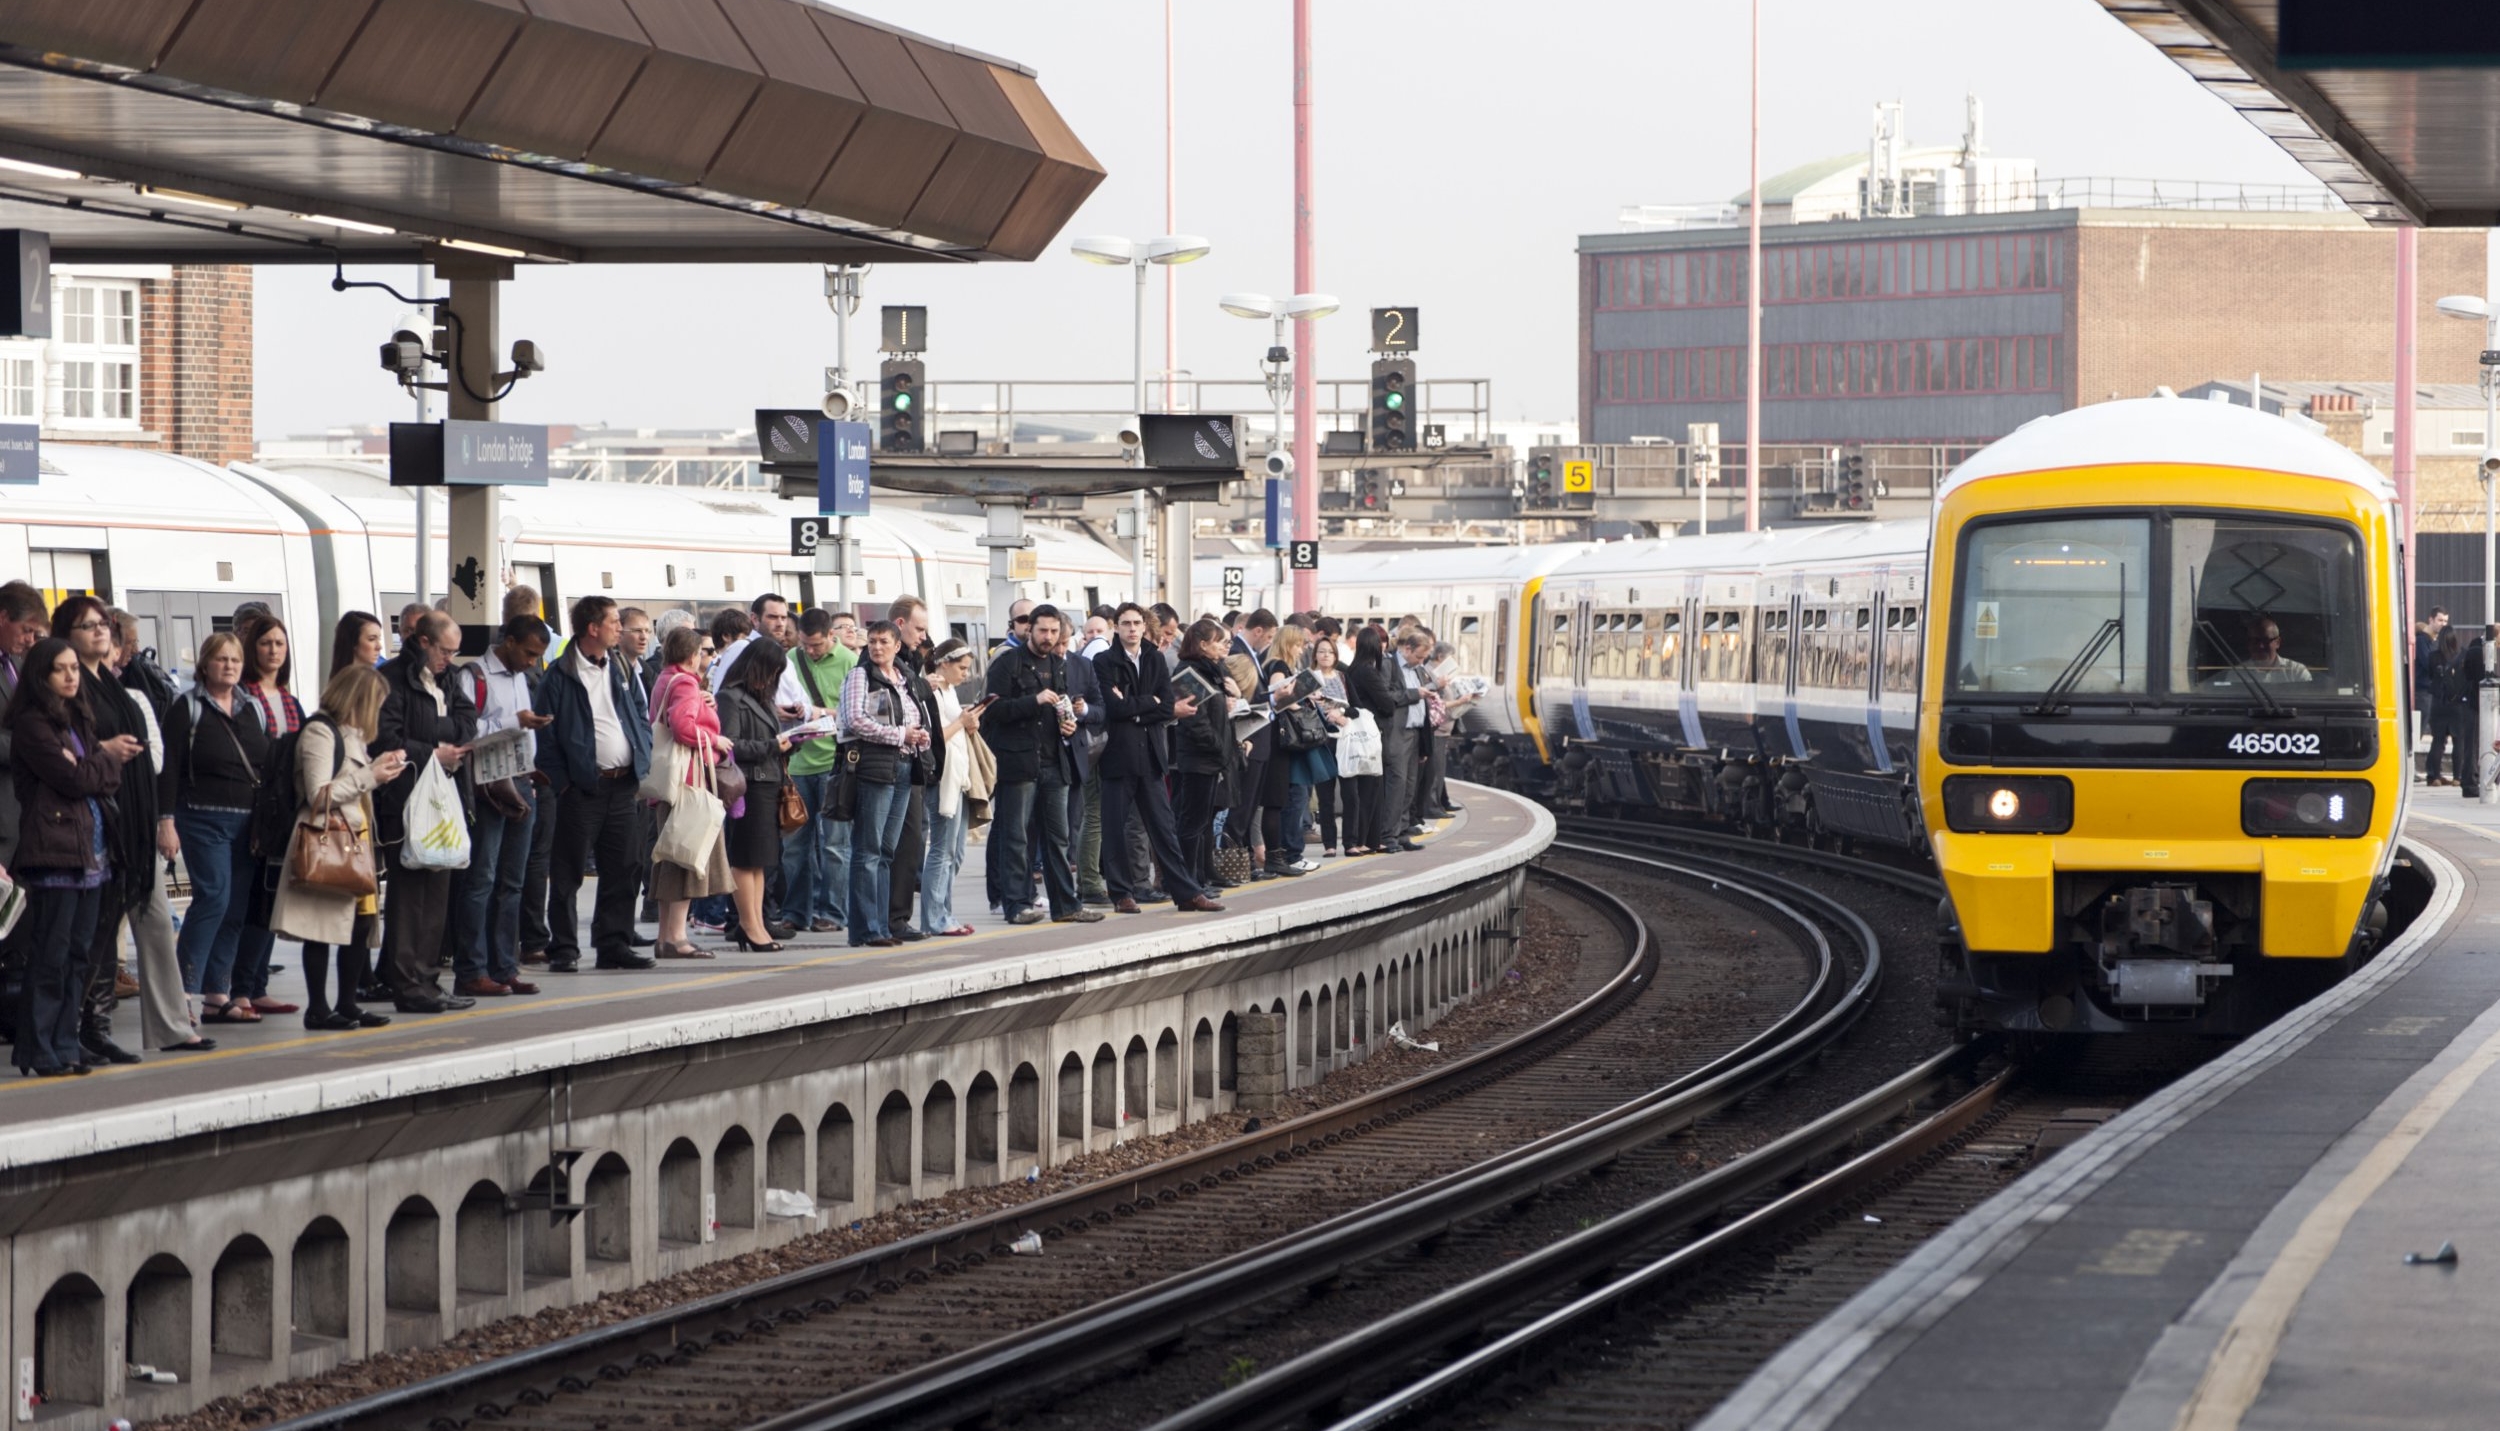 Britain People Are Advised Not To Travel By Rail During Strikes